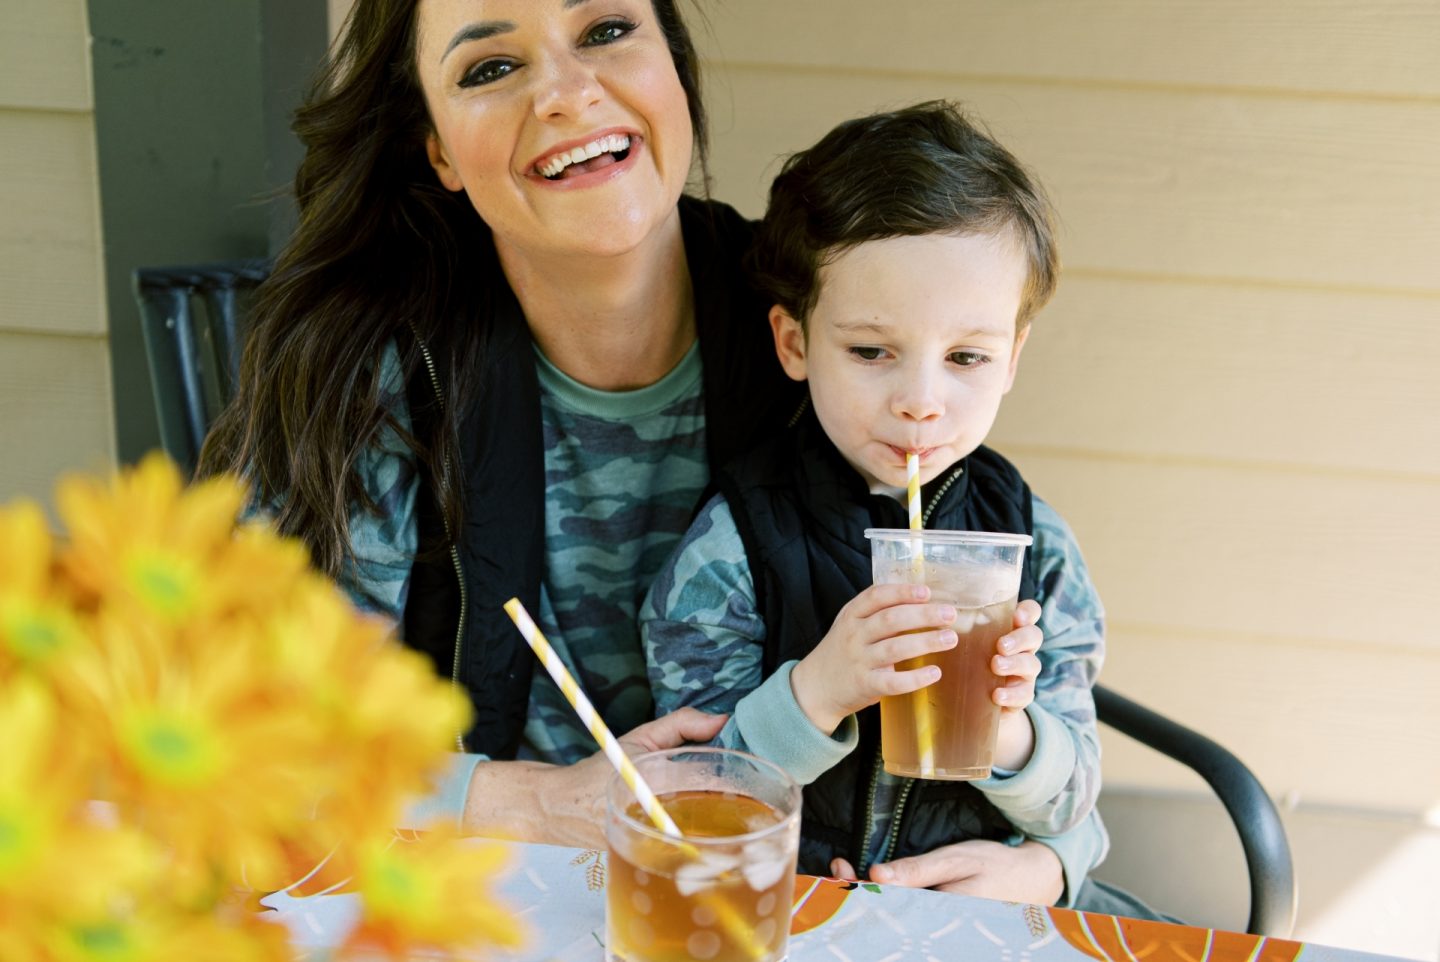 Thanksgiving Turkey Trot Tea Recipe For Kids + Fun Ideas For Families by Life + Style blogger, Heather Brown // My Life Well Loved